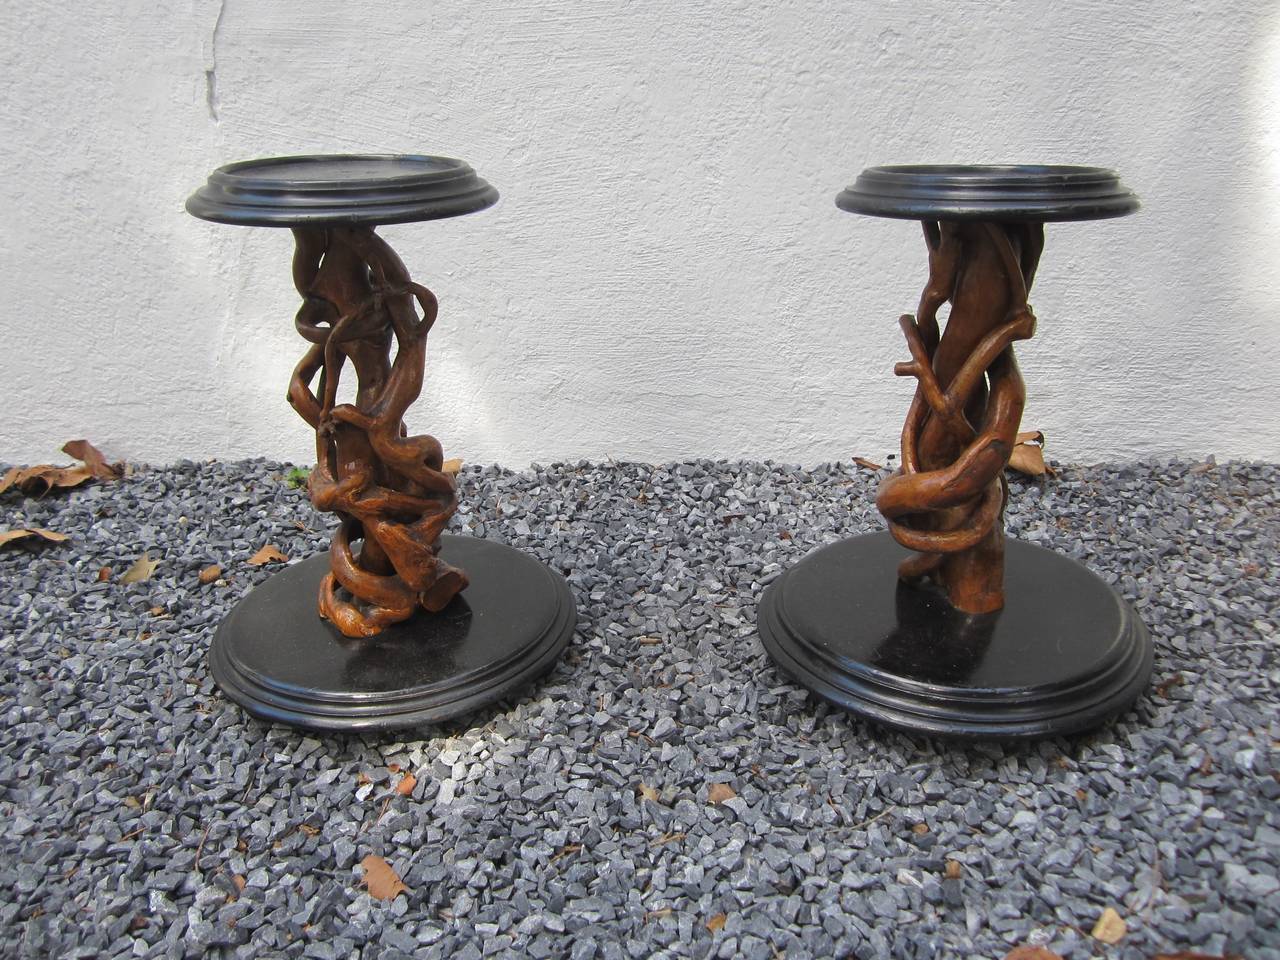 Pair of wood stands with rootwood columns black painted bases and plateaus very interesting pieces.